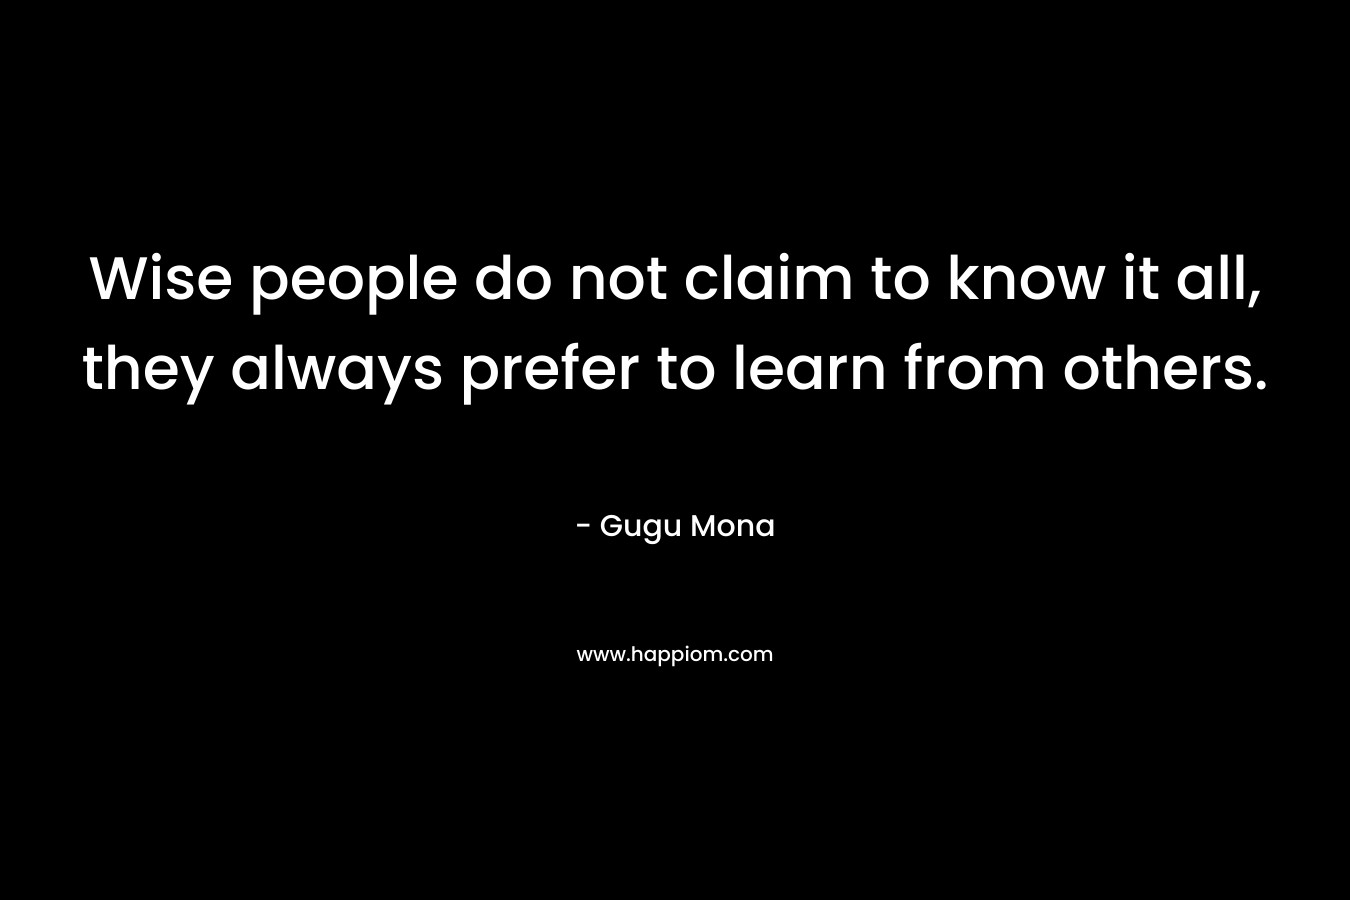 Wise people do not claim to know it all, they always prefer to learn from others.